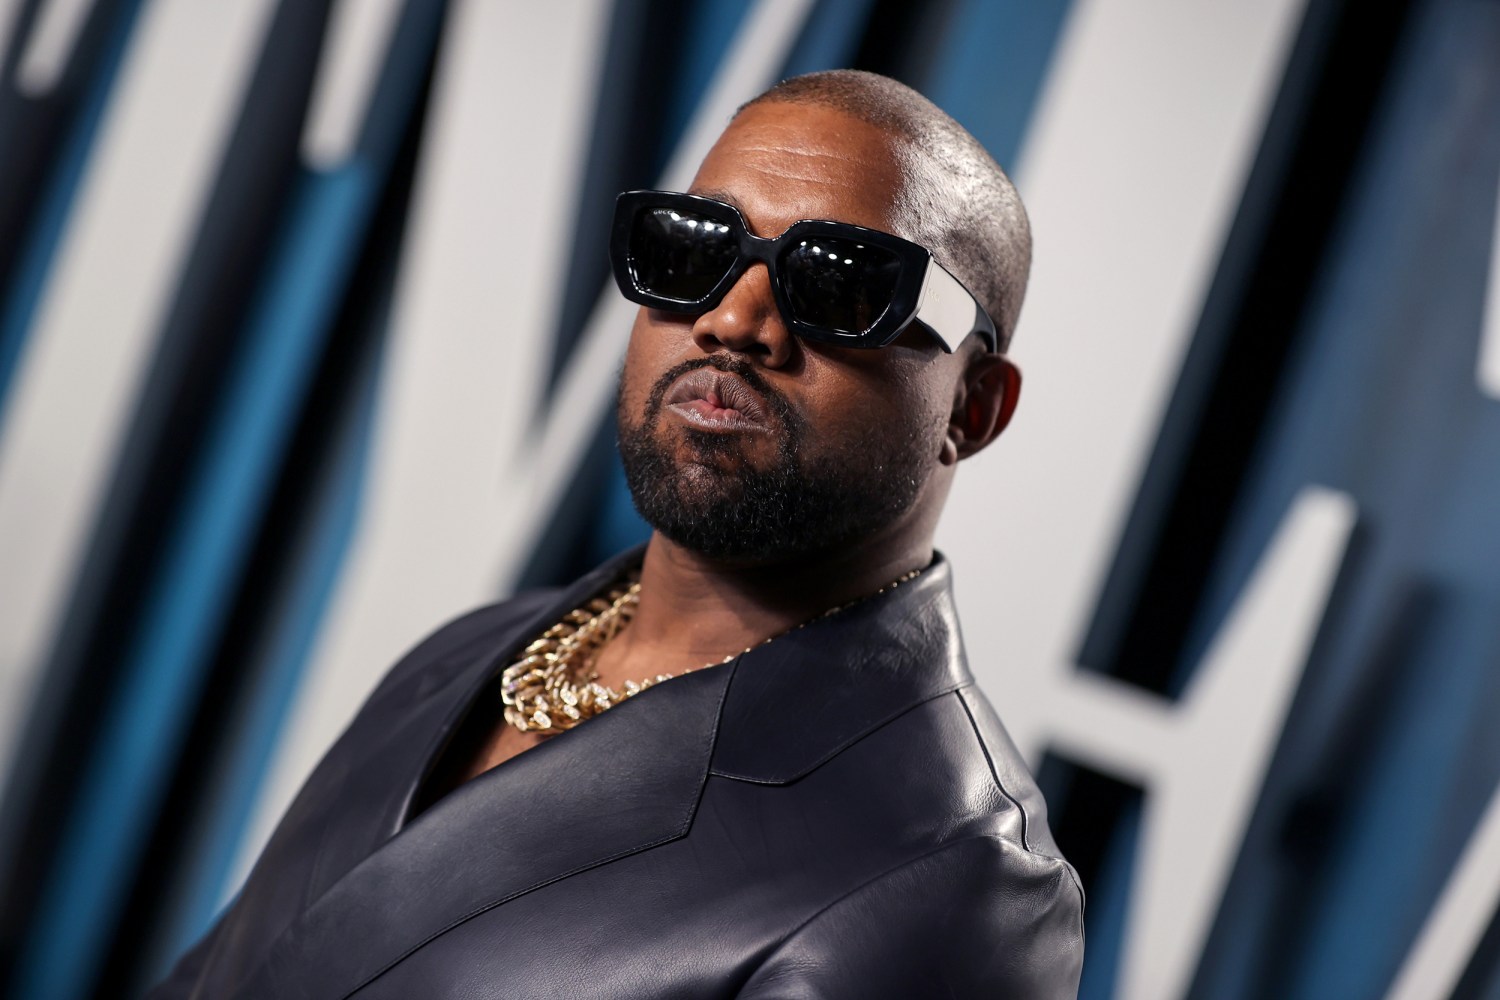 Kanye West Controversy: What Did The Rapper Say And Has He Apologised?